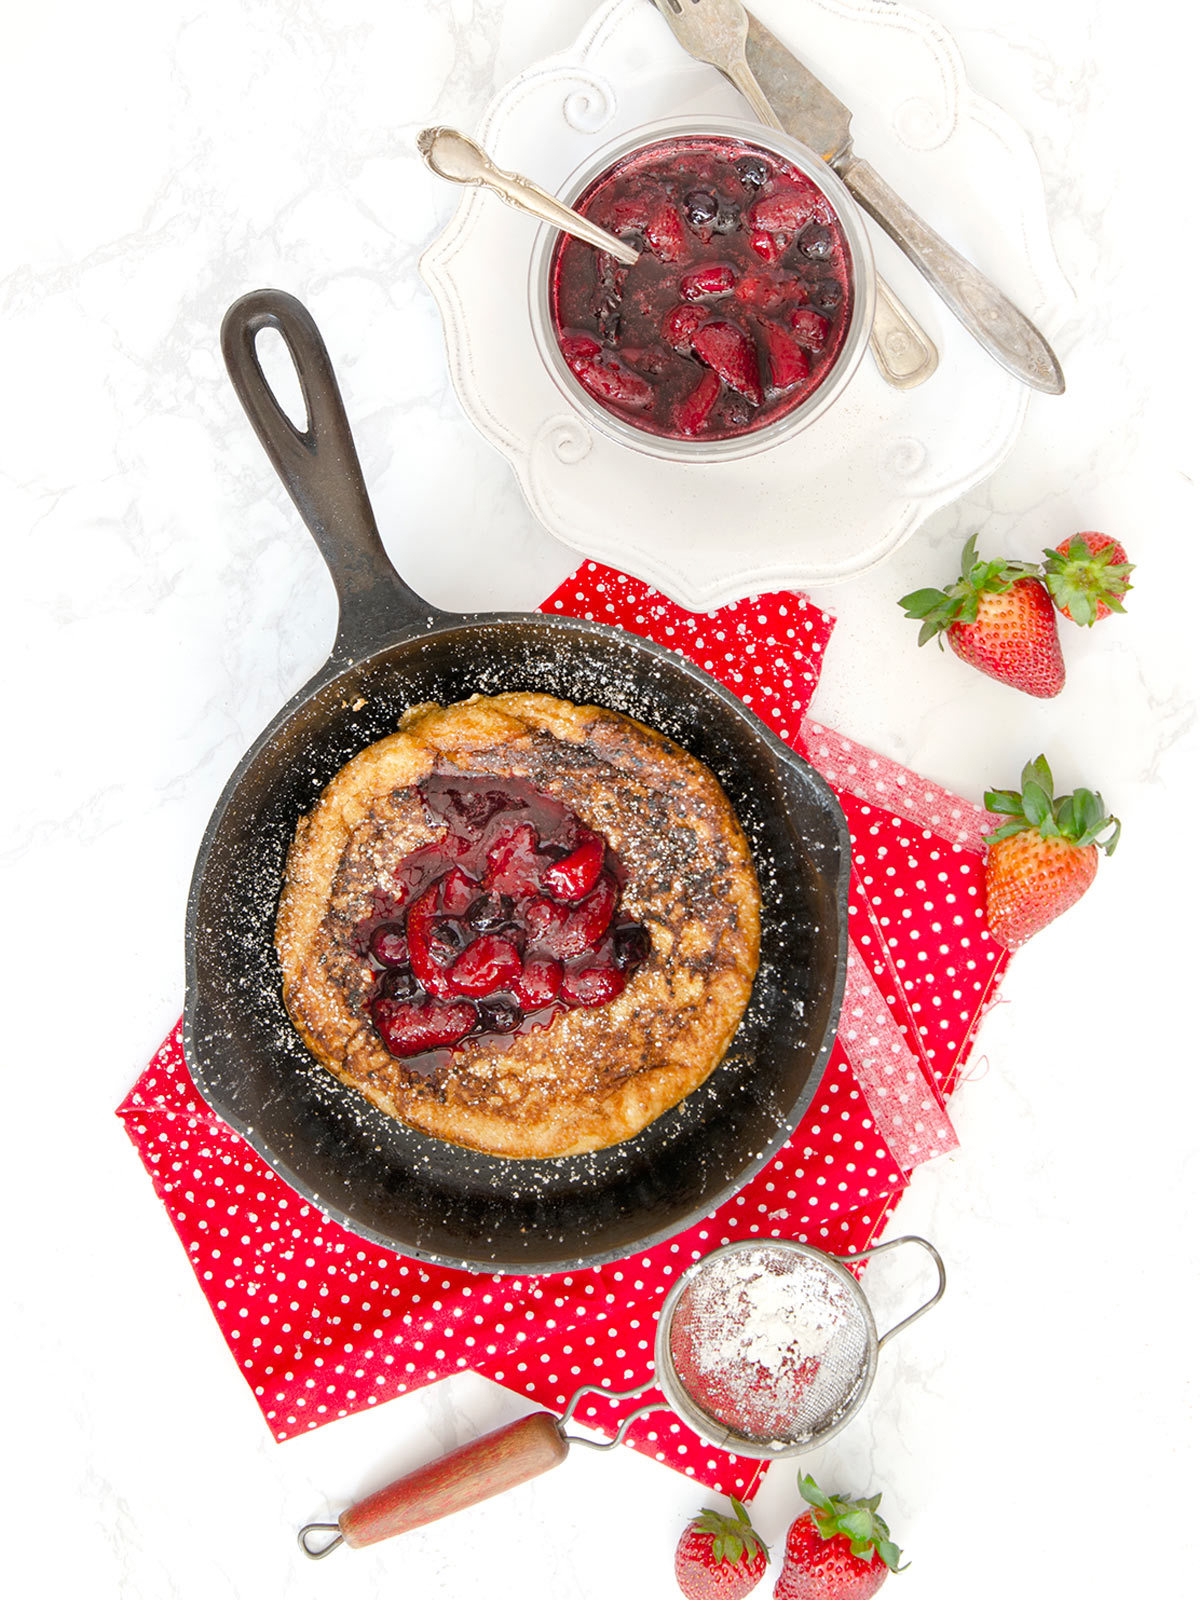 Matzo meal pancake in a cast iron pan with fruit compote on top and on the side in a clear glass bowl.